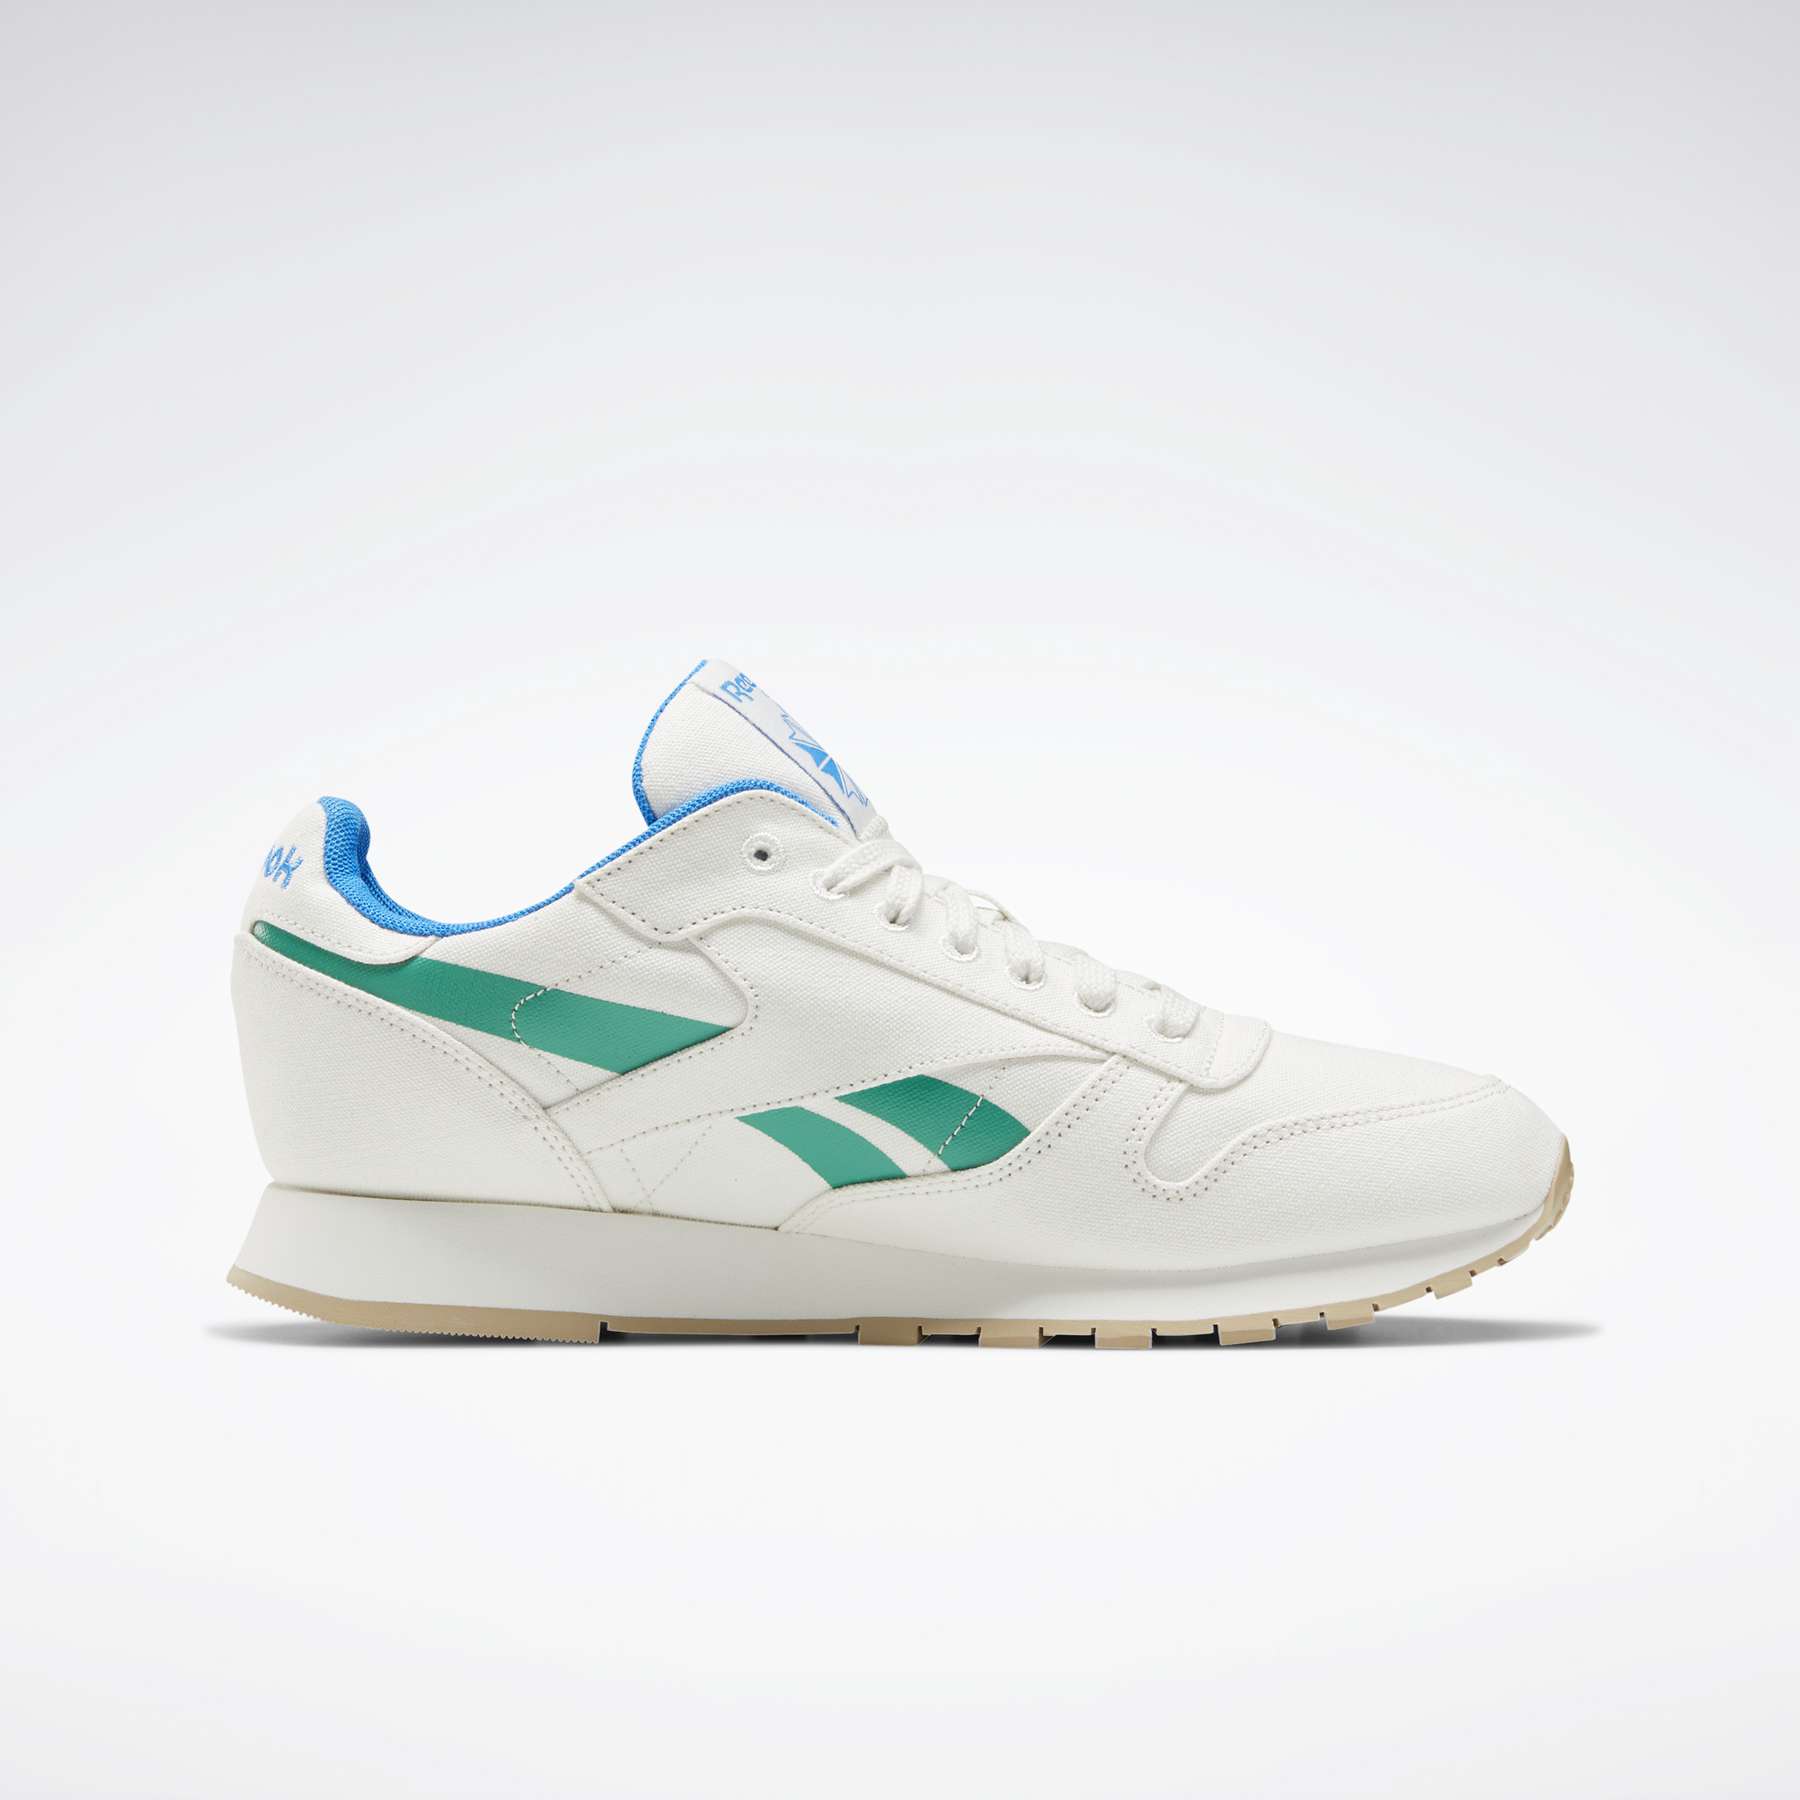 Reebok Classic Leather Grow Men's Shoes